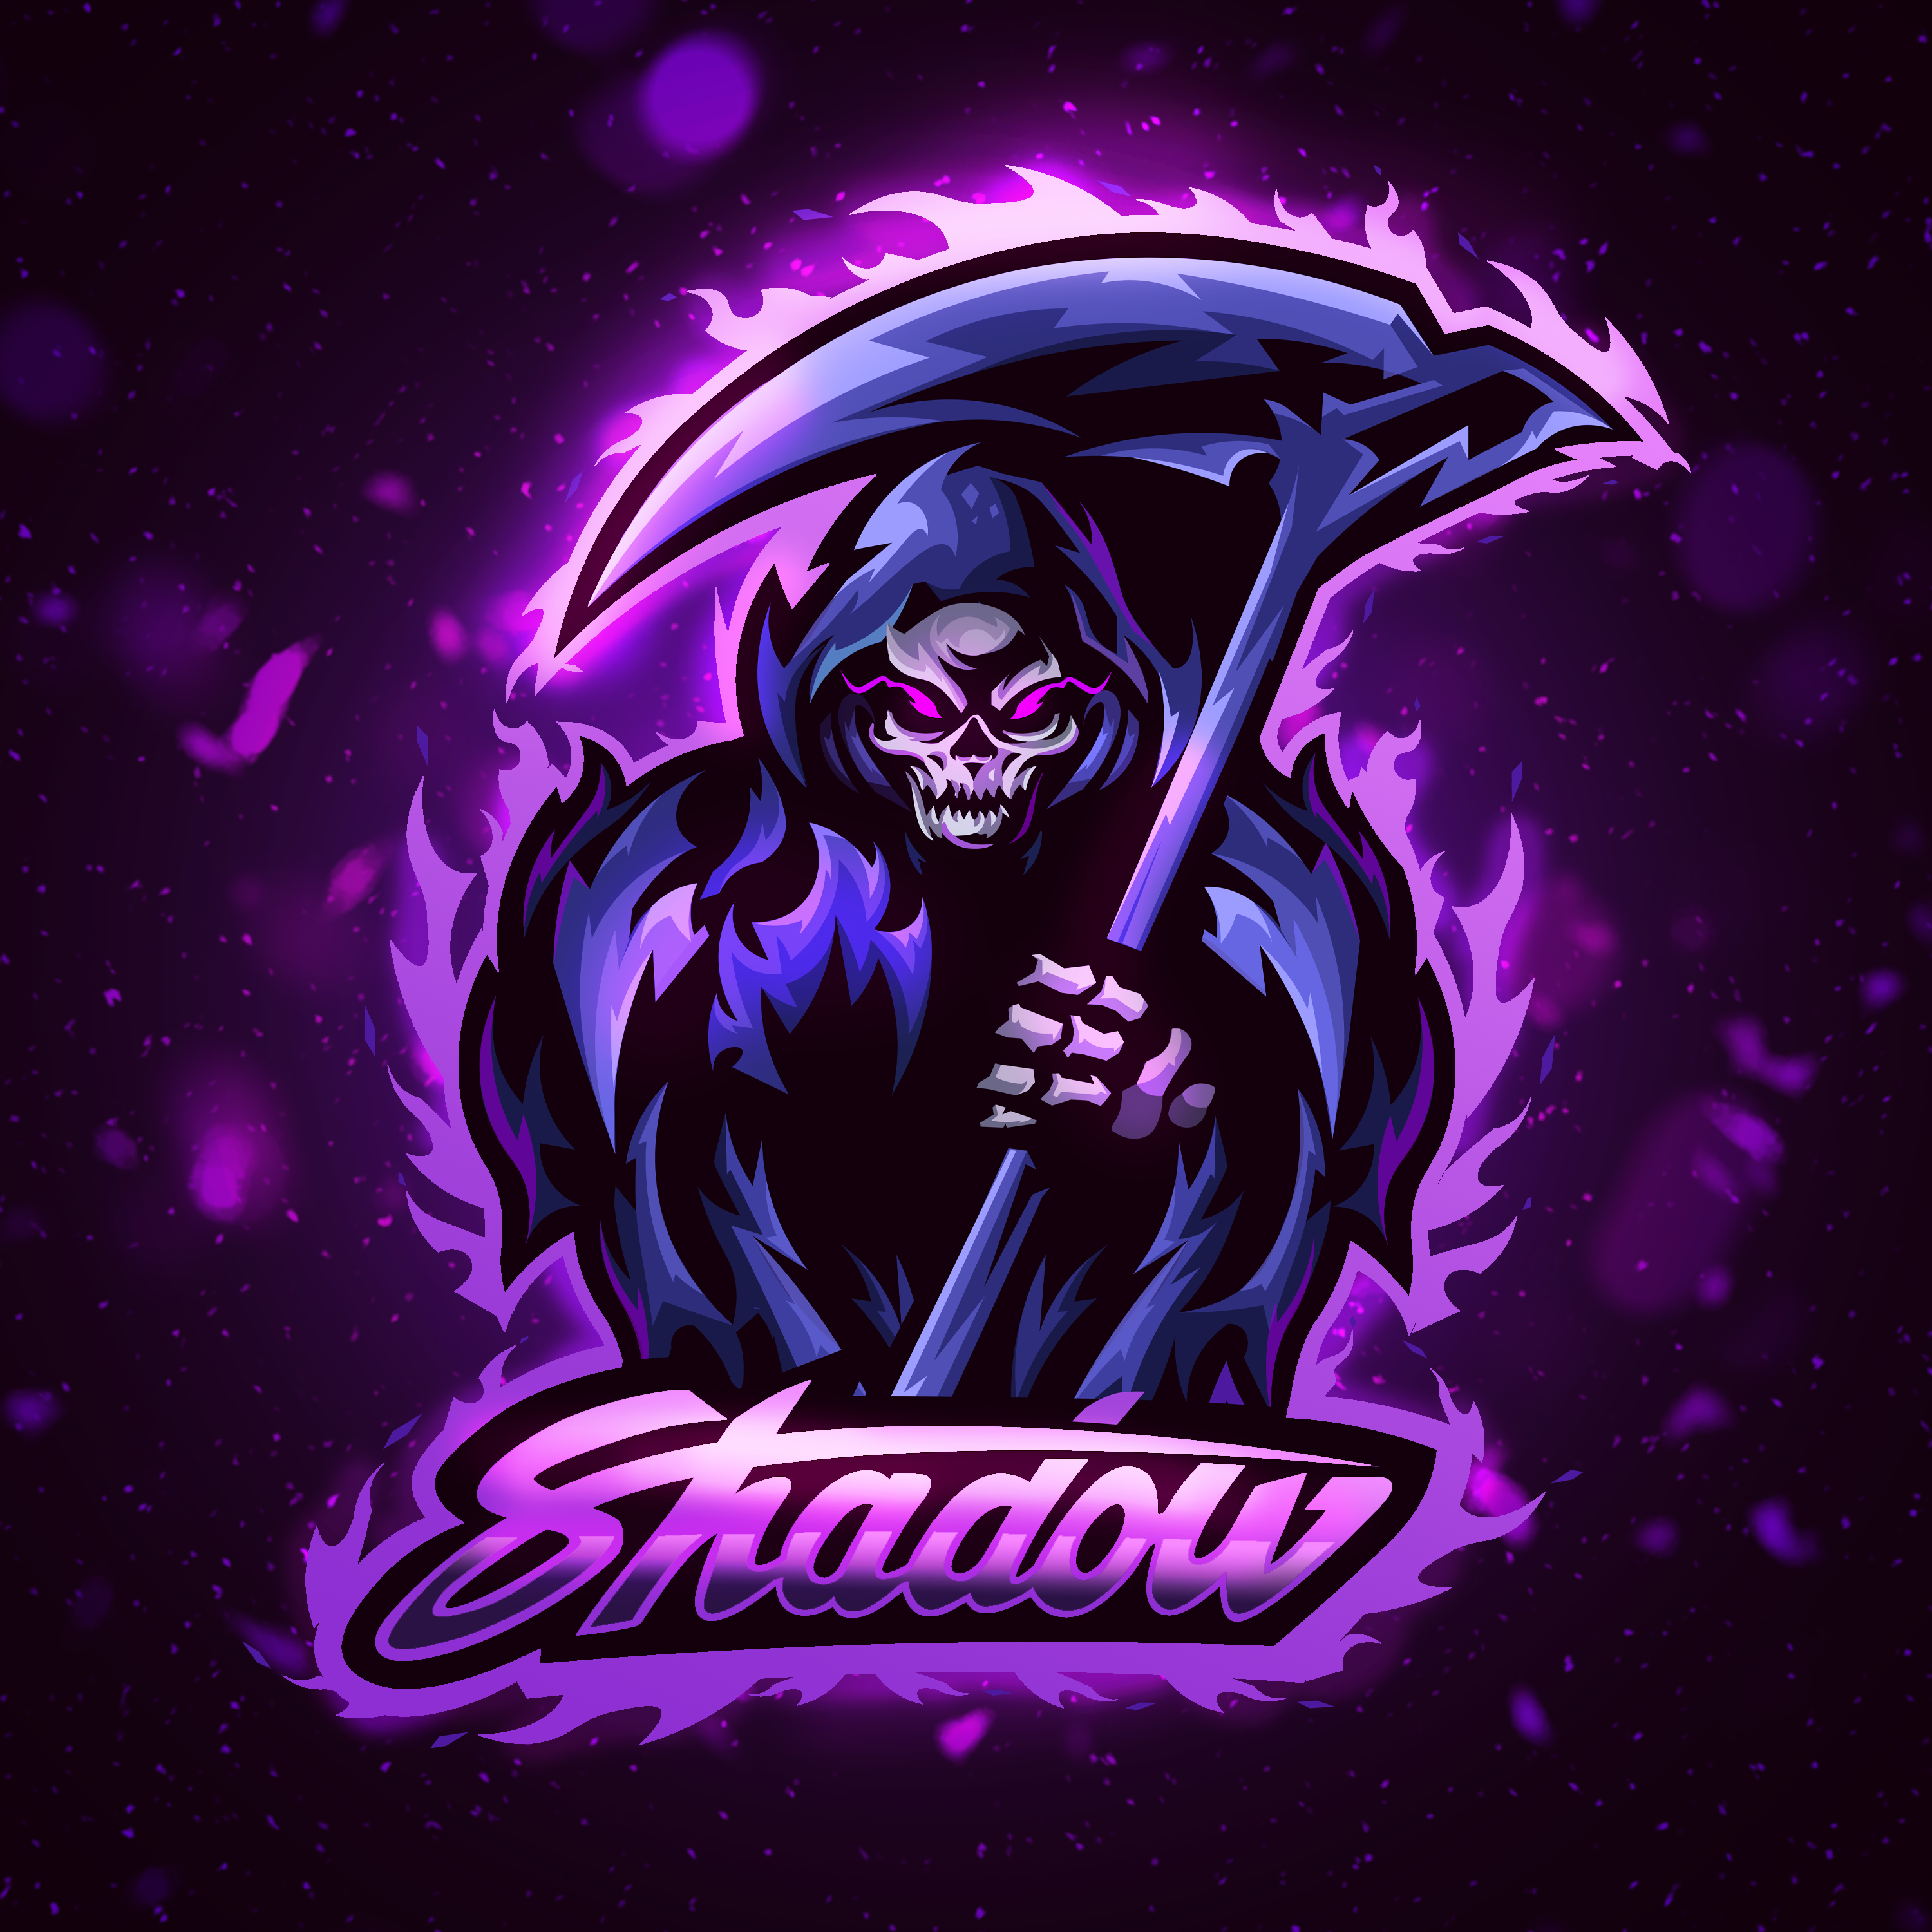 Shadow Ghost Schyte Esports Logo done on Fiverr!